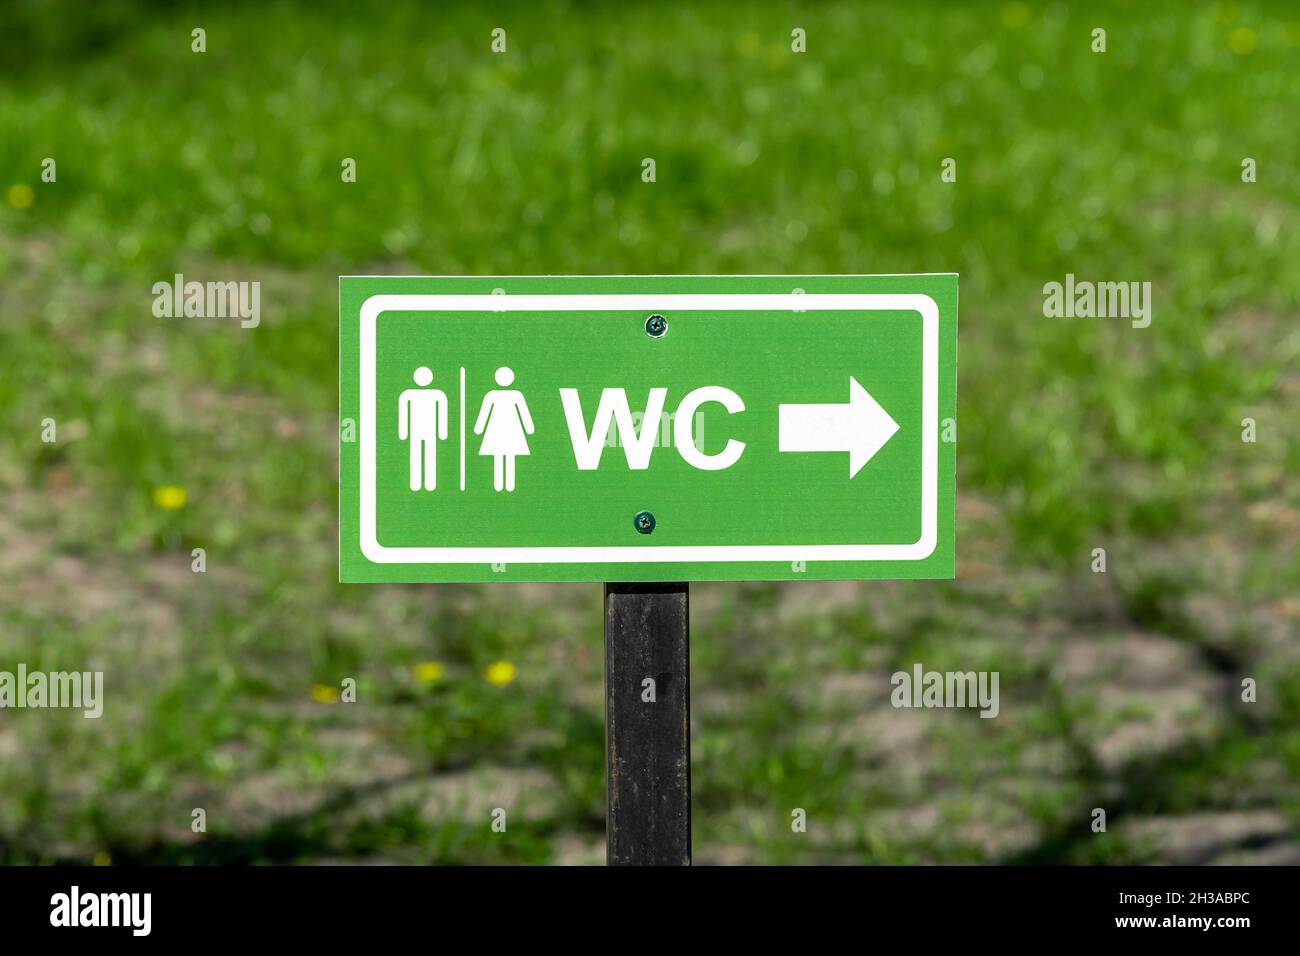 WC logo, sign of public toilets on the street against grass background. Stock Photo